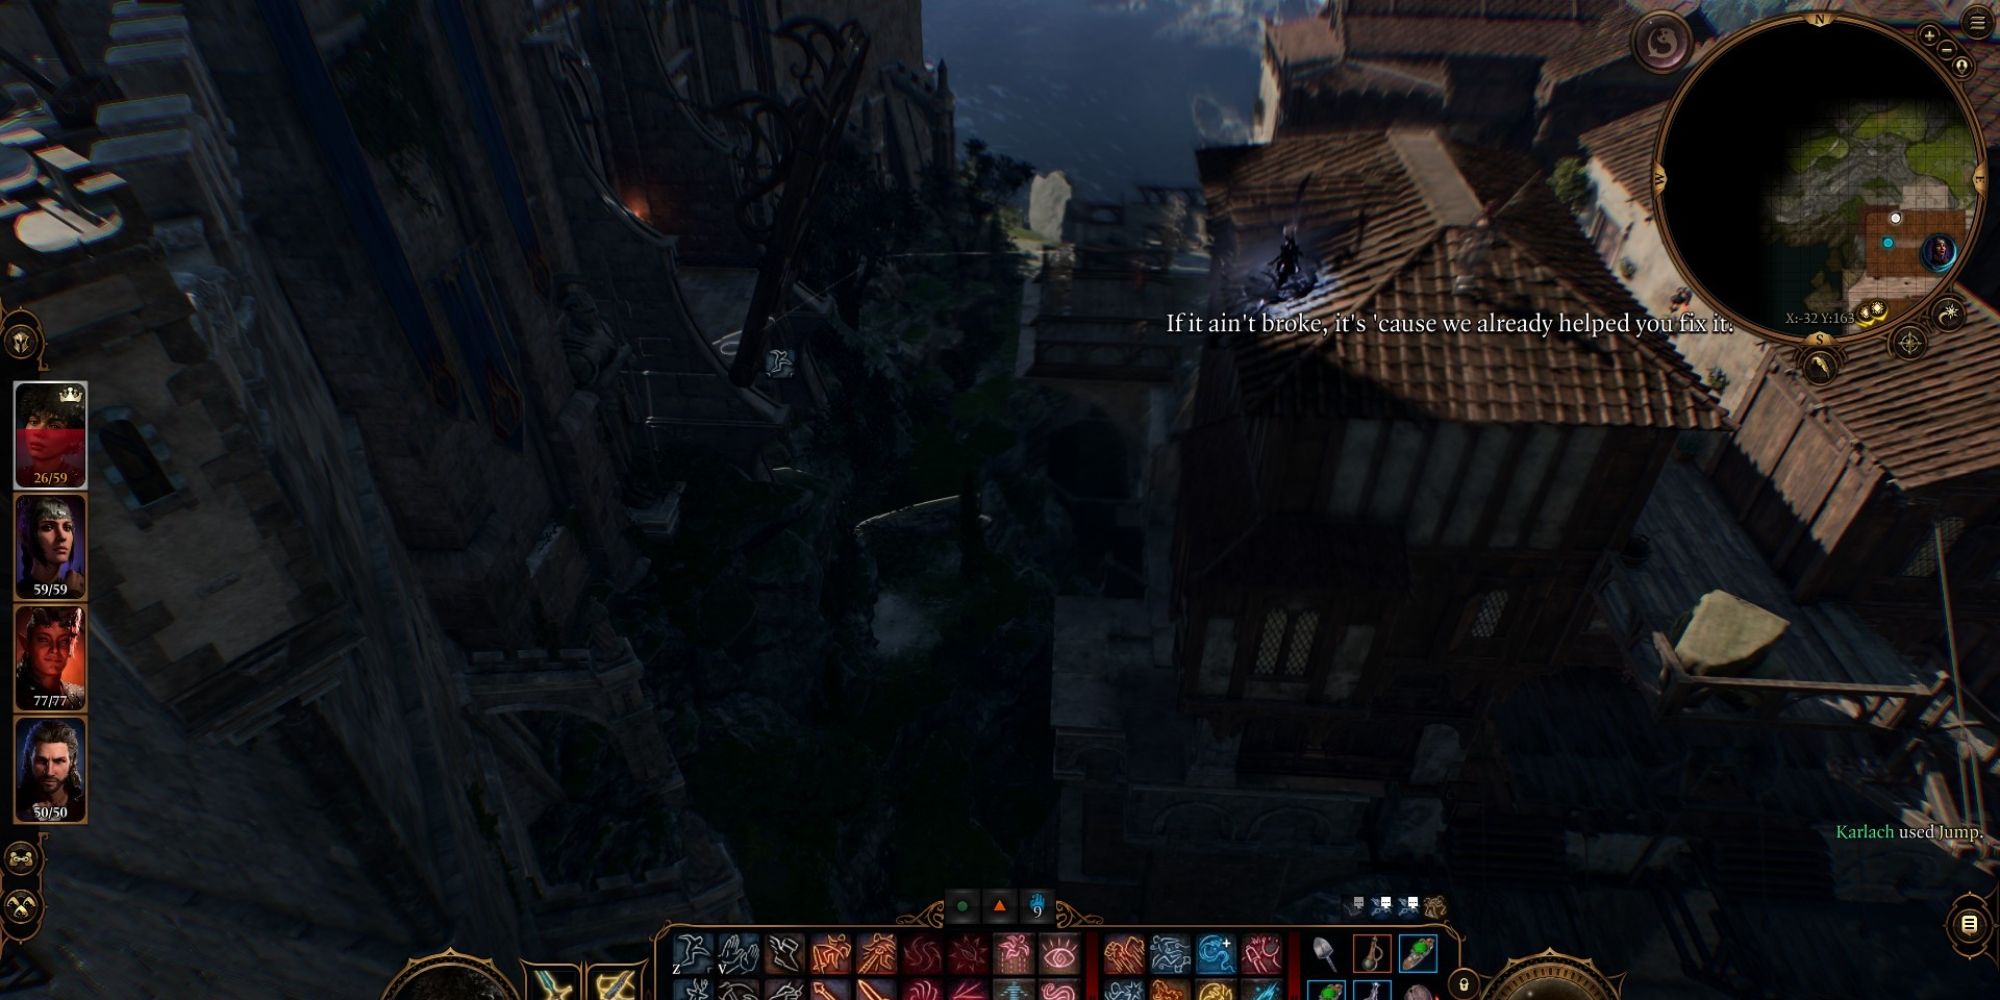 Baldur's Gate 3 Player Using Fly Ability On Rooftop